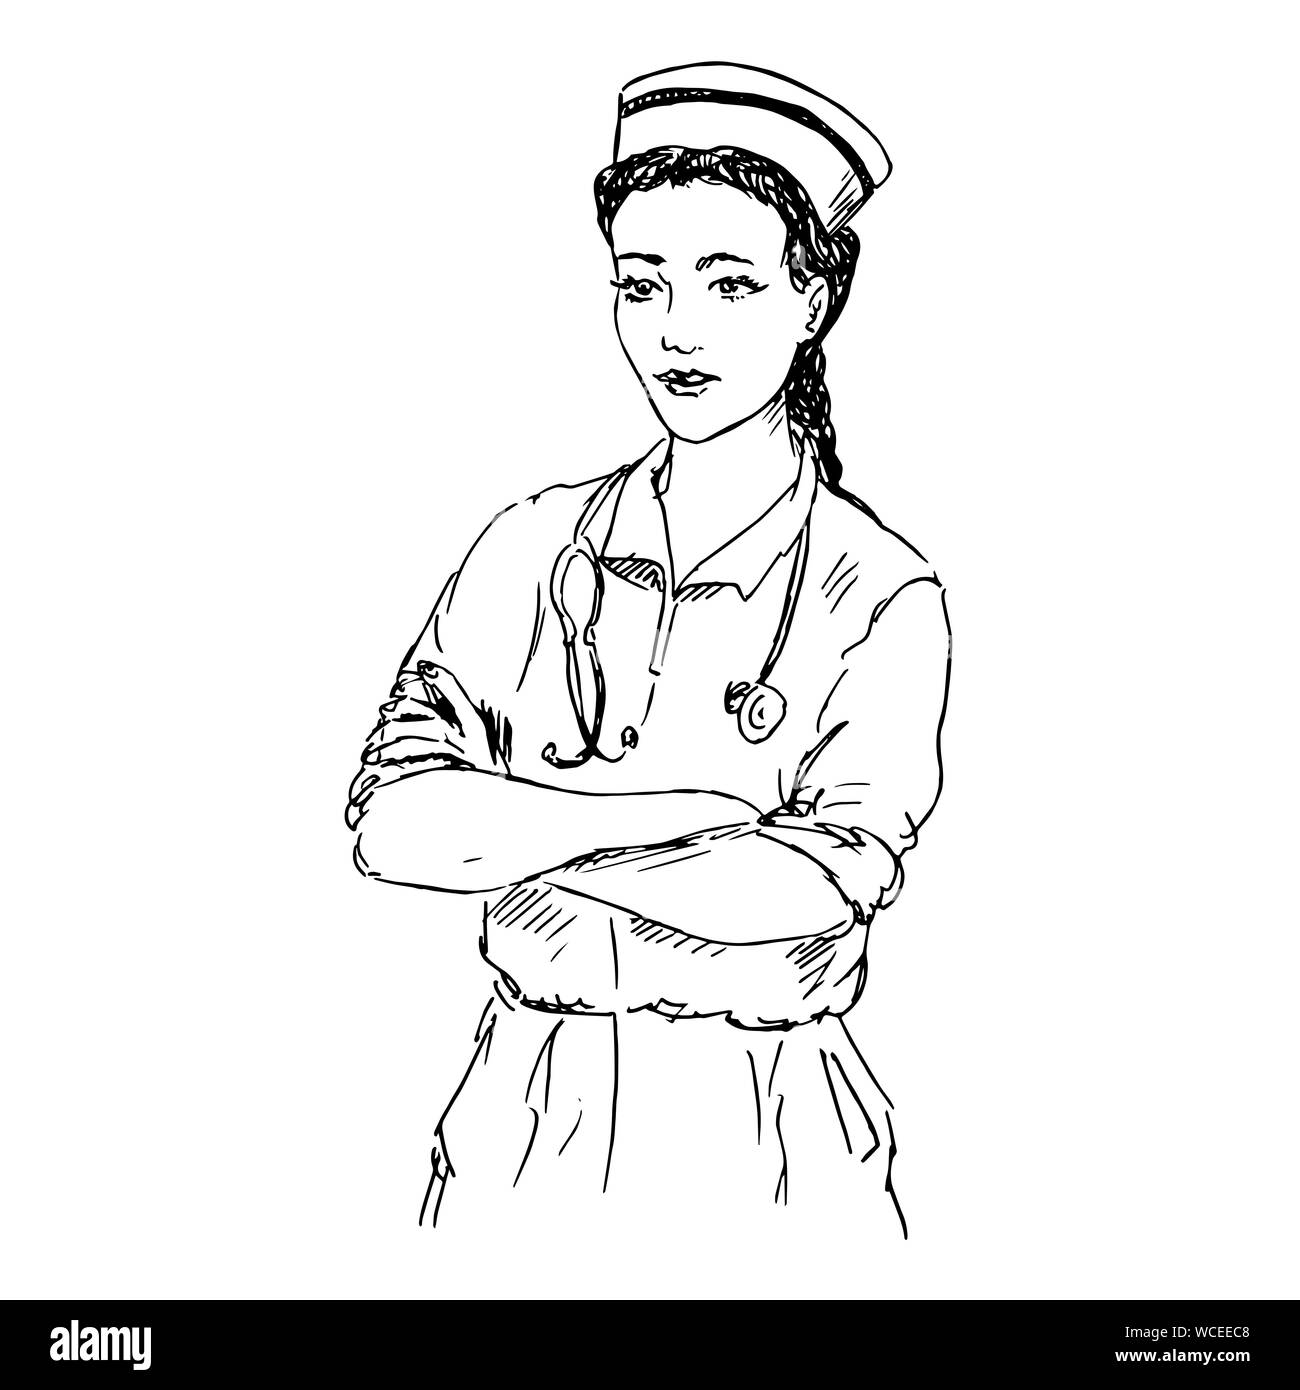 Nurse with stethoscope standing straight and smiling, hand drawn doodle, sketch in pop art style, black and white illustration Stock Photo